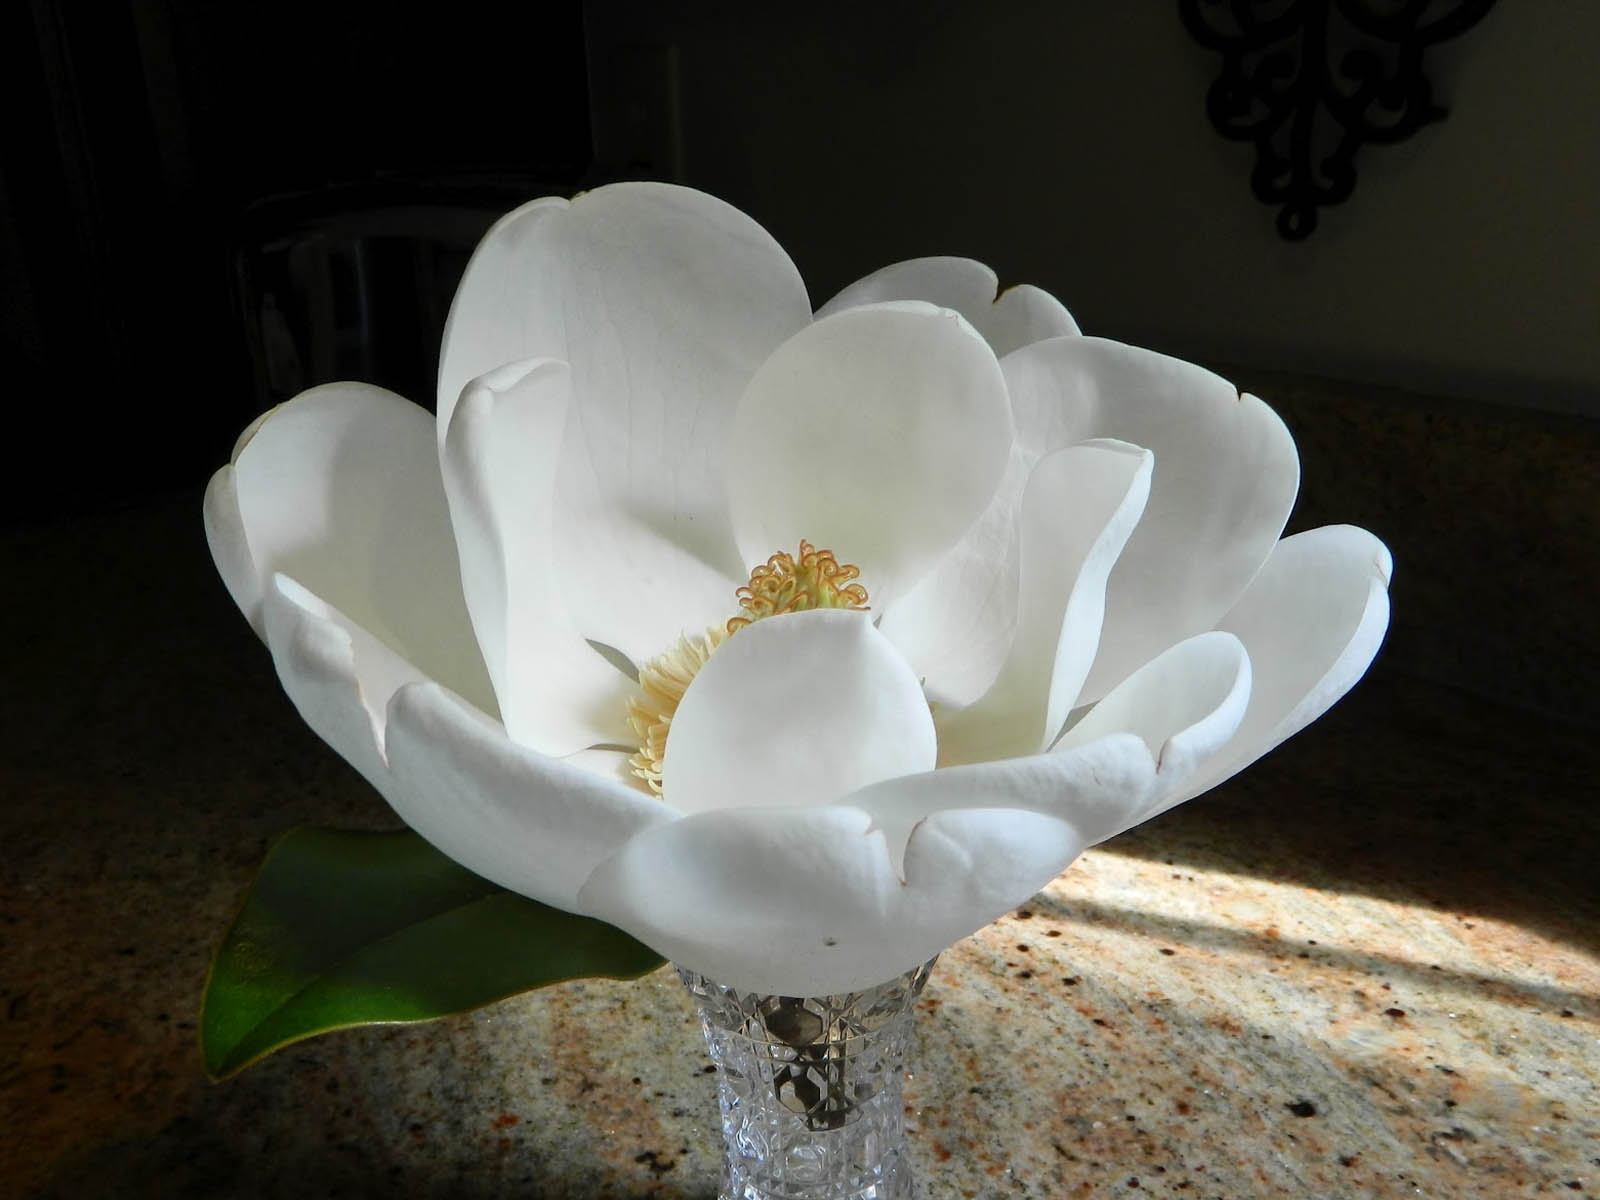 Tag Magnolia Blossom Wallpaper Image Photos Pictures And Background